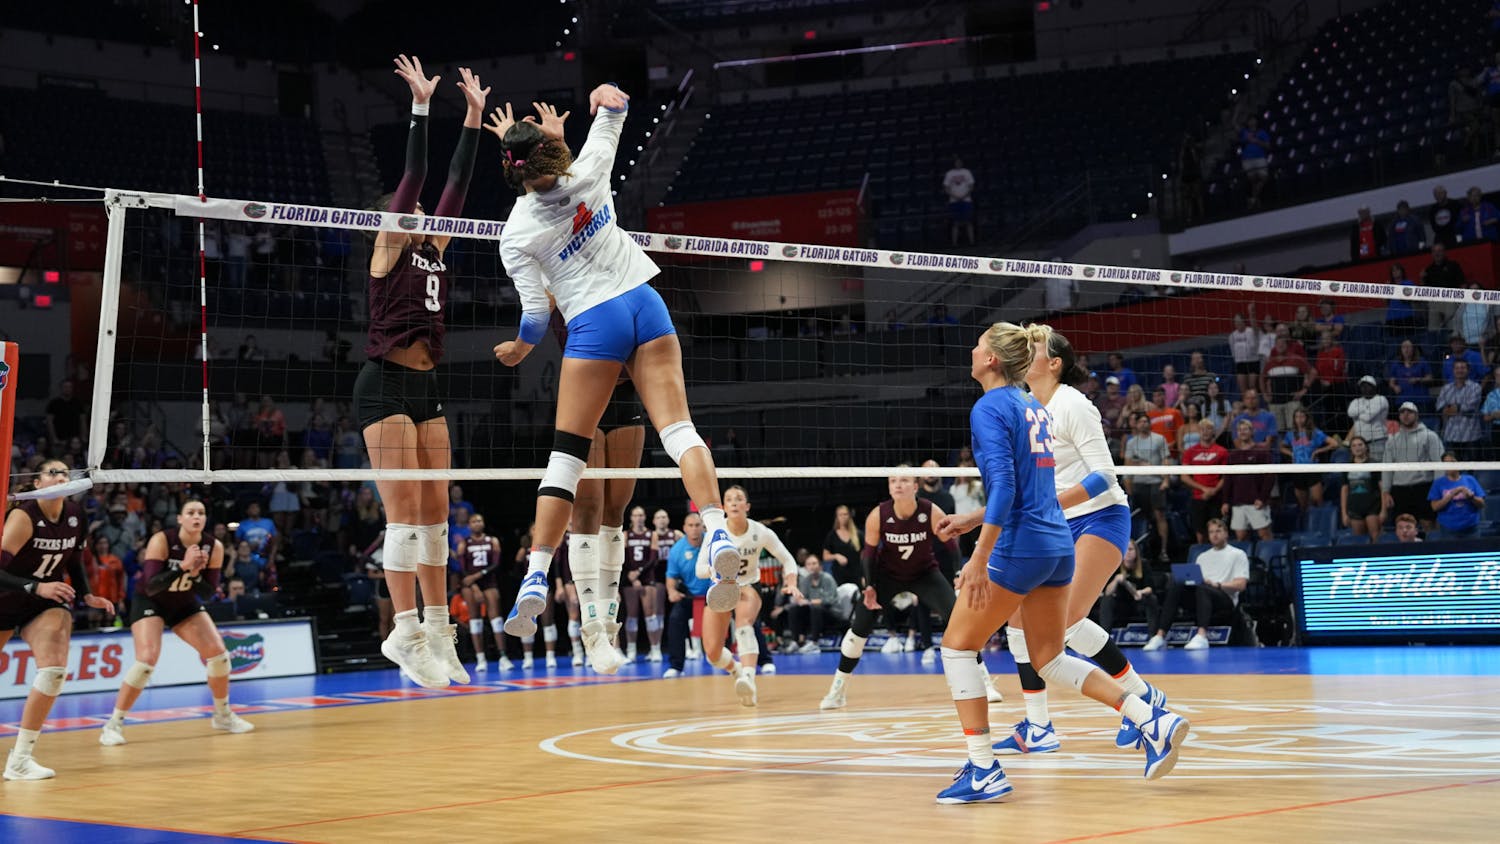 Senior outside hitter Sofia Victoria spikes the ball in the Gators' 3-2 loss against the Texas A&M Aggies on Wednesday, Sept. 27, 2023.